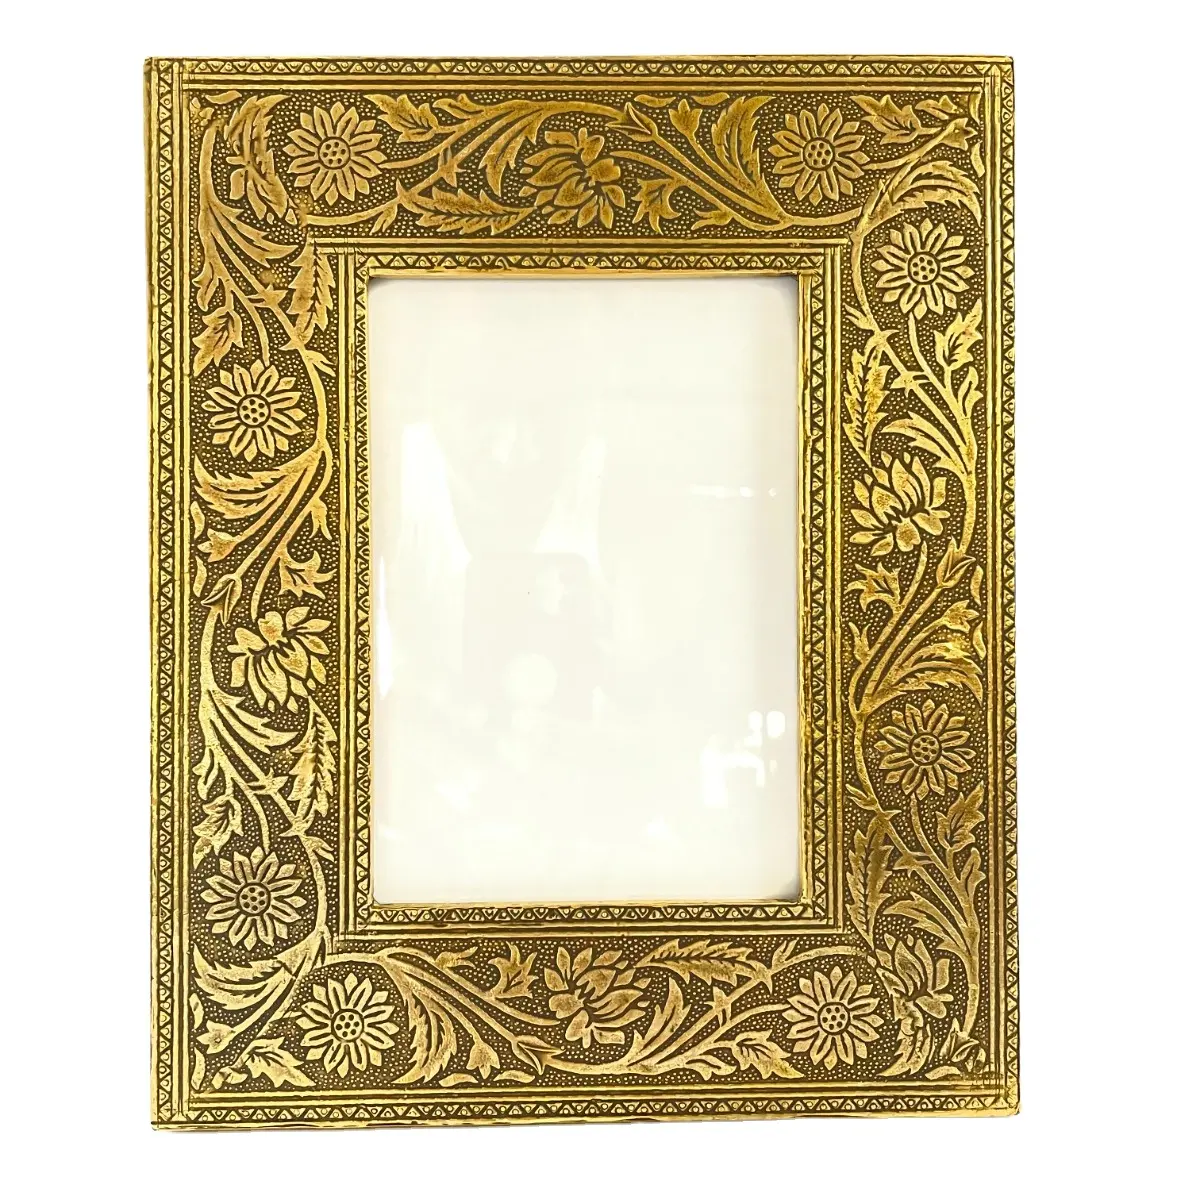 Luxury Mdf Brass Personalized Photo Frame Incredible Gifts India Engraved Wedding Anniversary Wooden Photo Frame